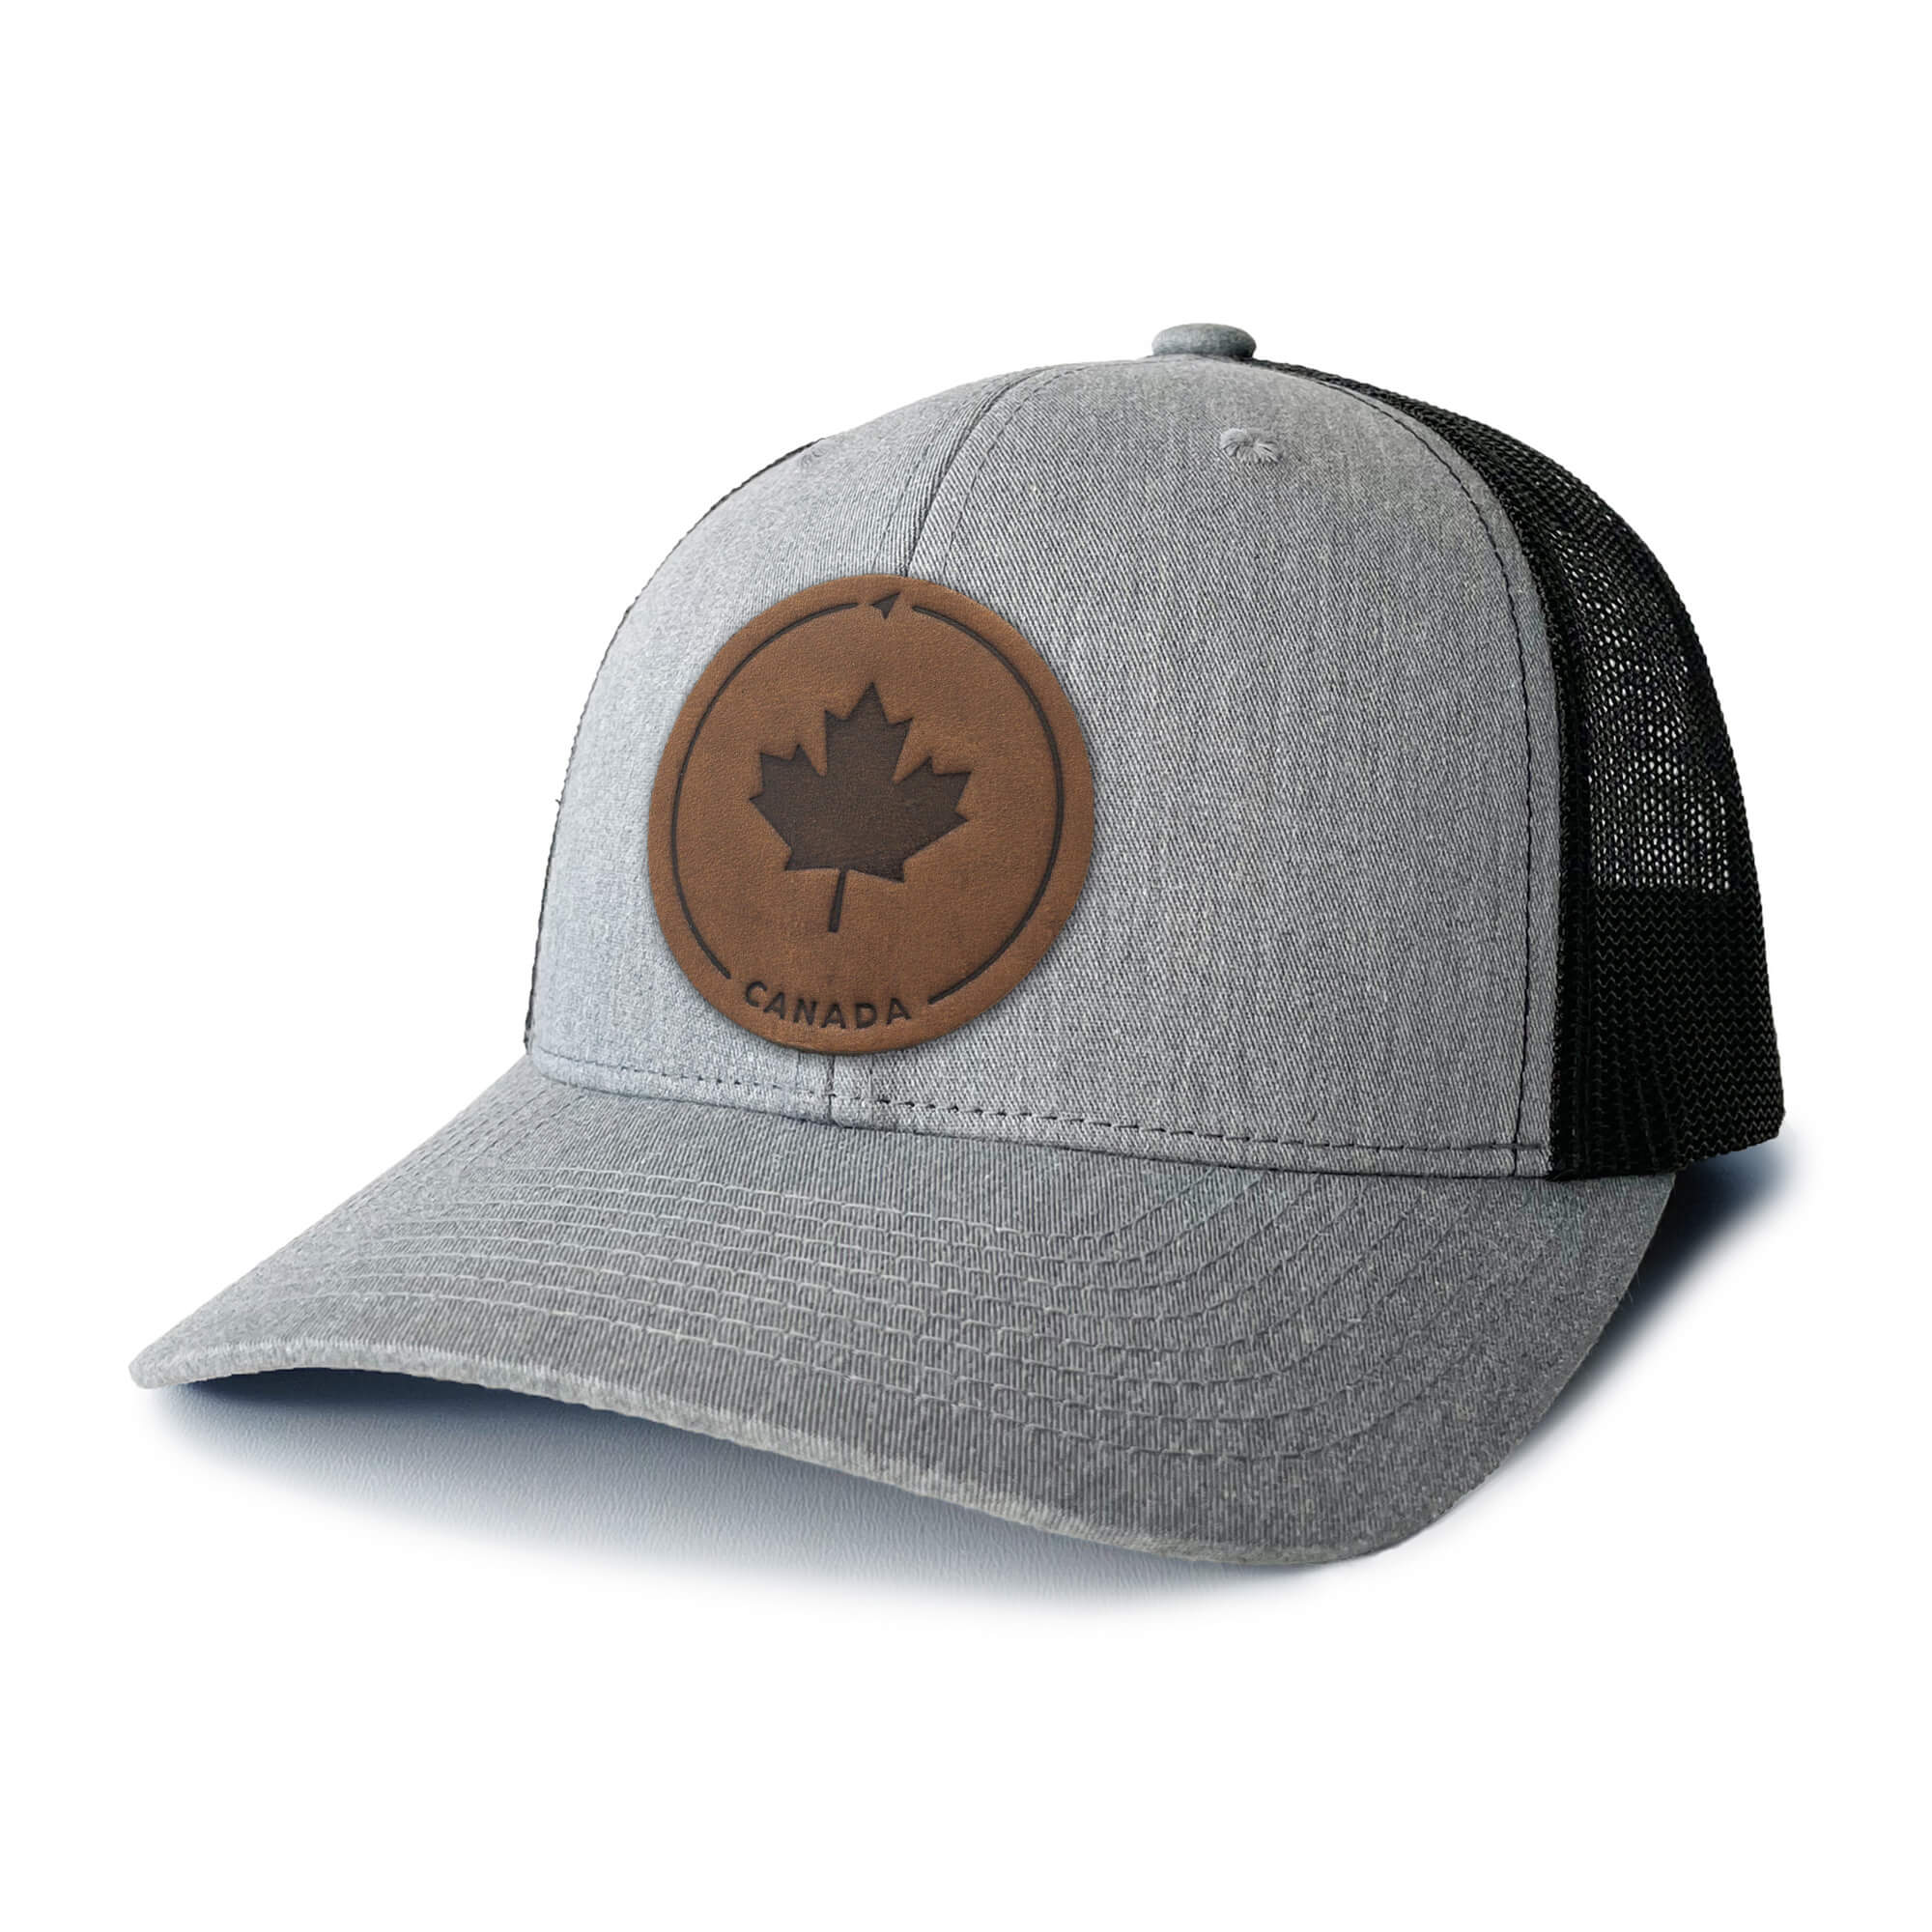 Heather Grey and white trucker hat with full-grain leather patch of Maple Leaf | BLACK-002-001, CHARC-002-001, NAVY-002-001, HGREY-002-001, MOSS-002-001, BROWN-002-001, RED-002-001